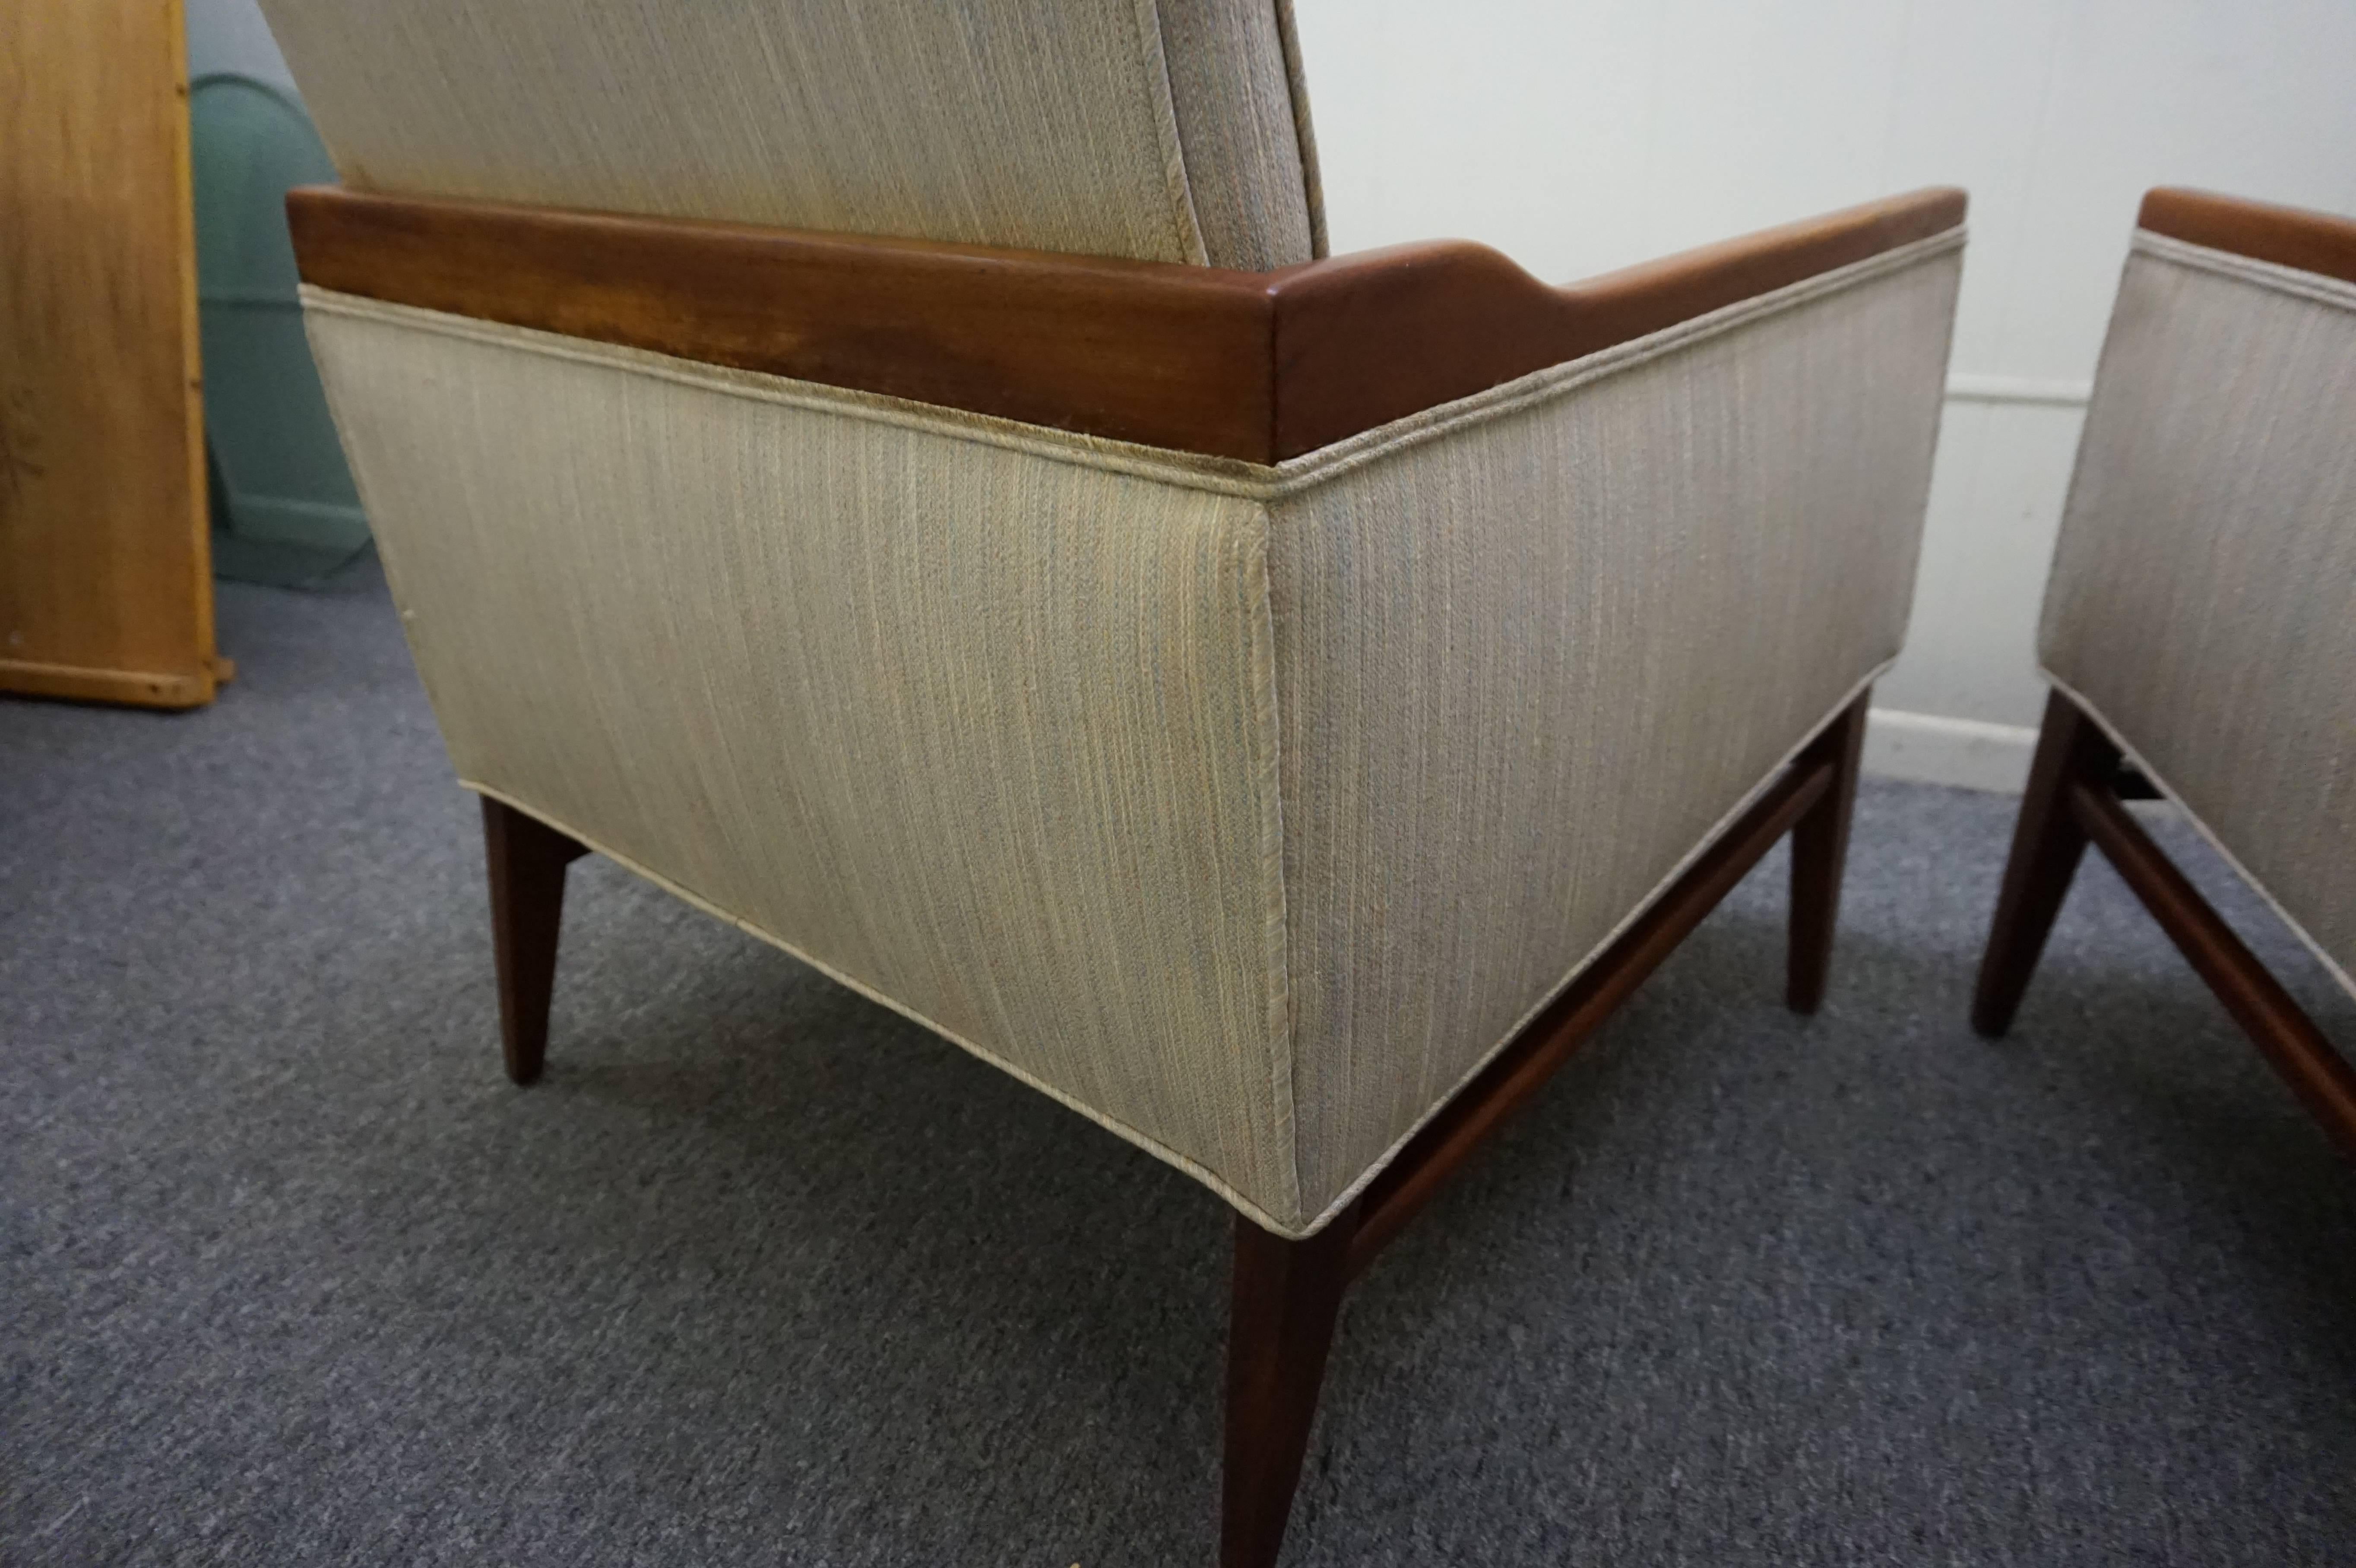 Mid-20th Century Stunning Pair of American Mid-Century Modern Walnut Lounge Chairs For Sale